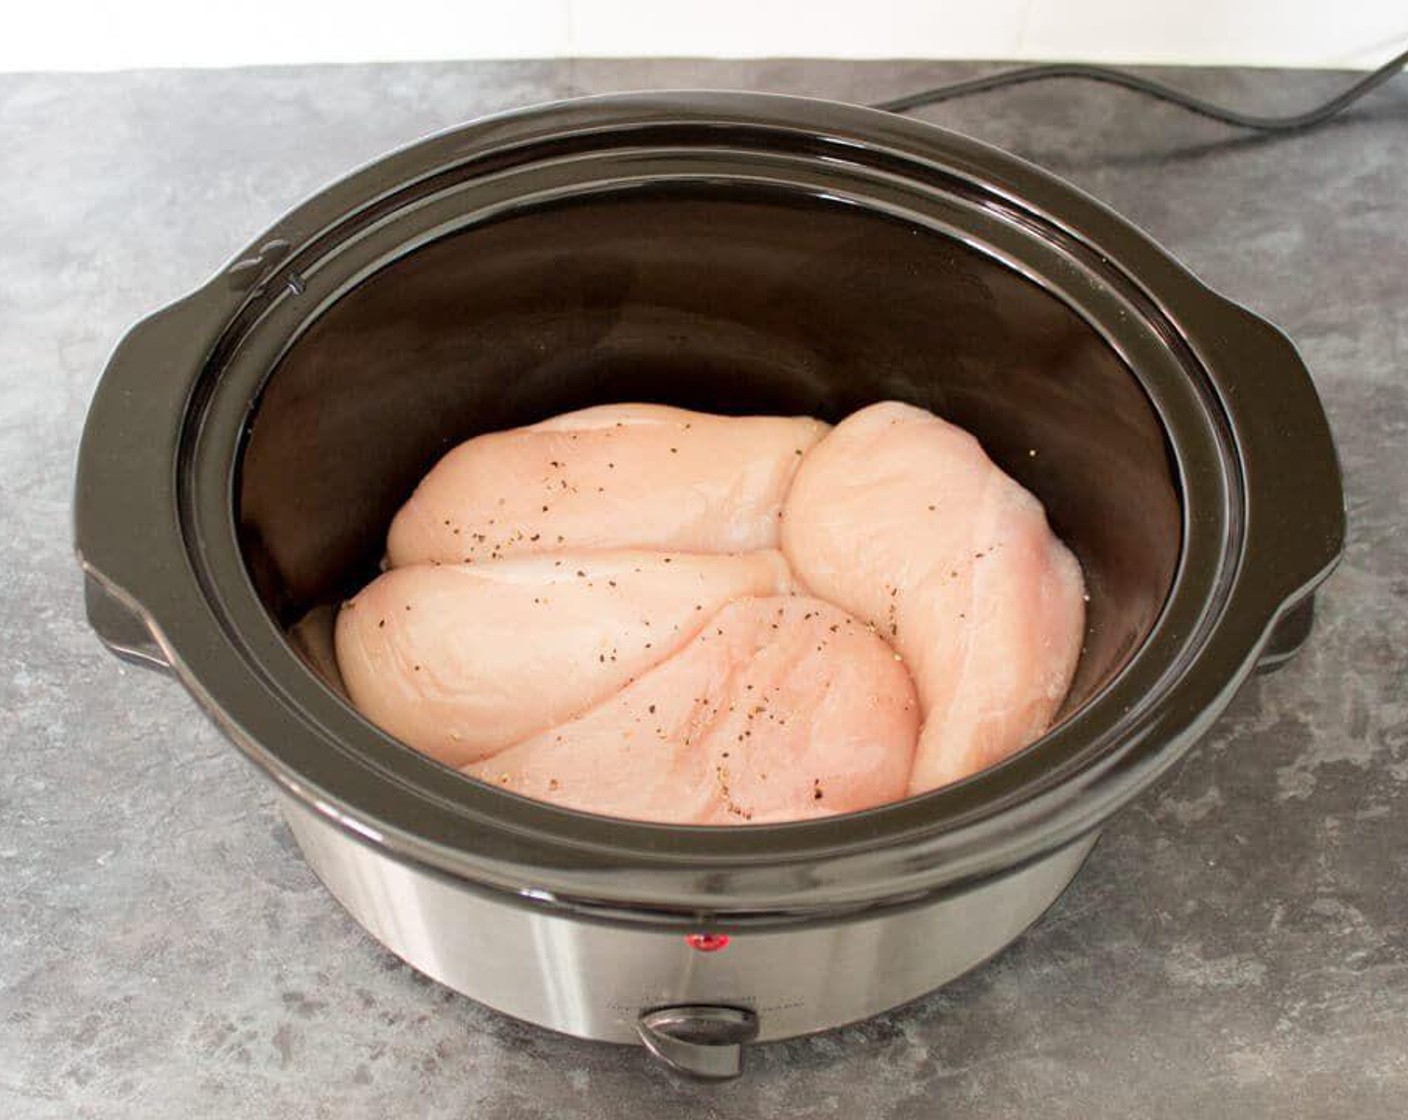 step 1 Place Boneless, Skinless Chicken Breasts (2 lb) into the slow cooker & season both sides of each one with Salt (to taste) and Ground Black Pepper (to taste).